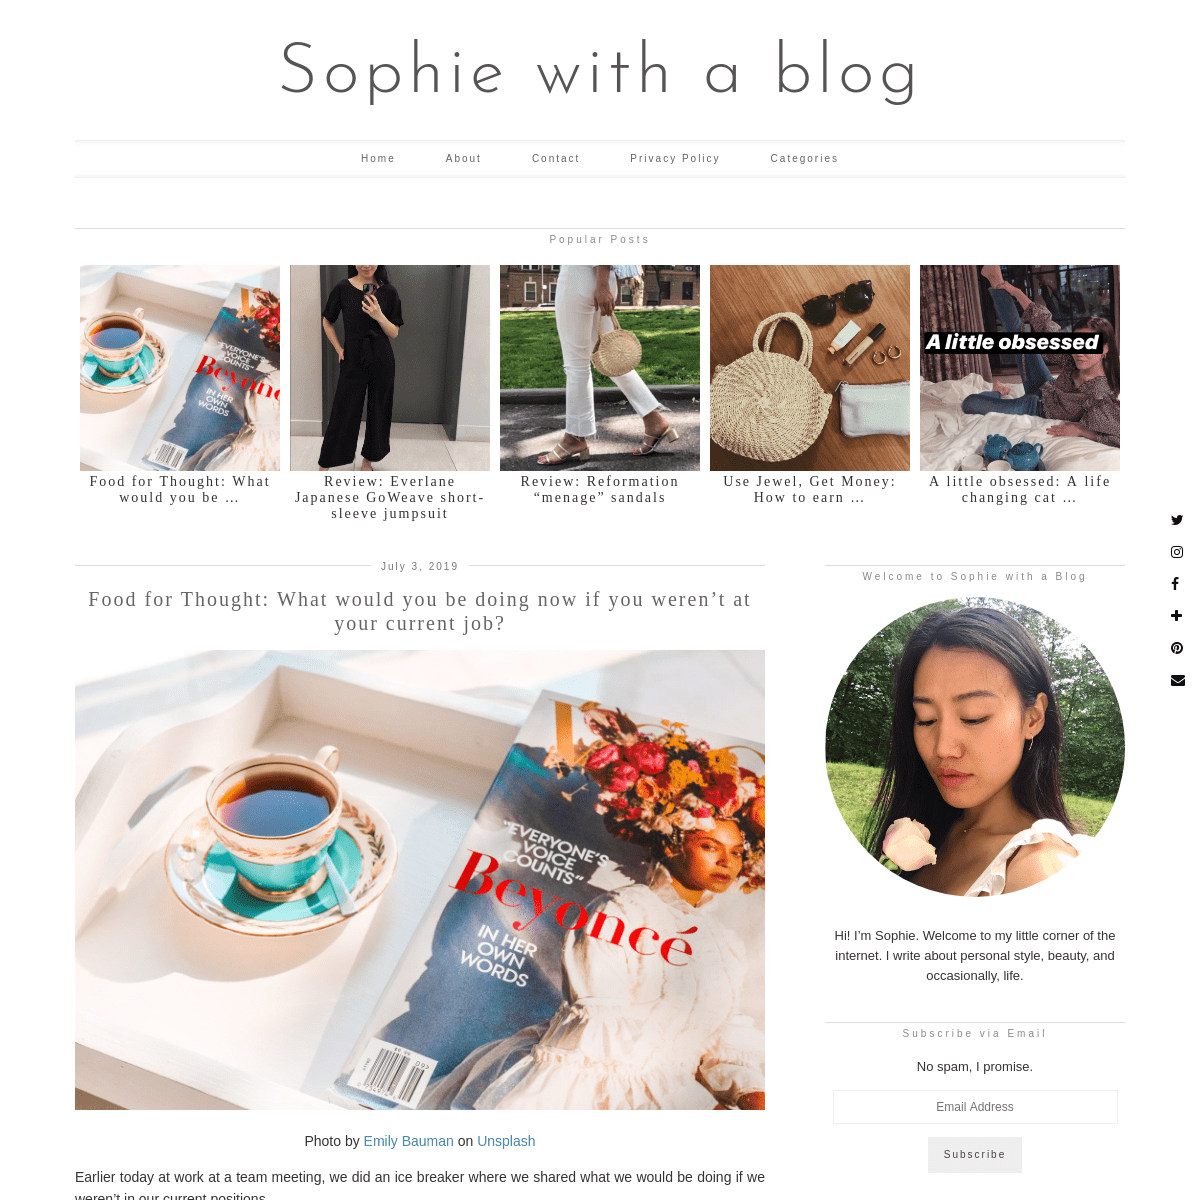 Sophie with a blog – On life, style, beauty